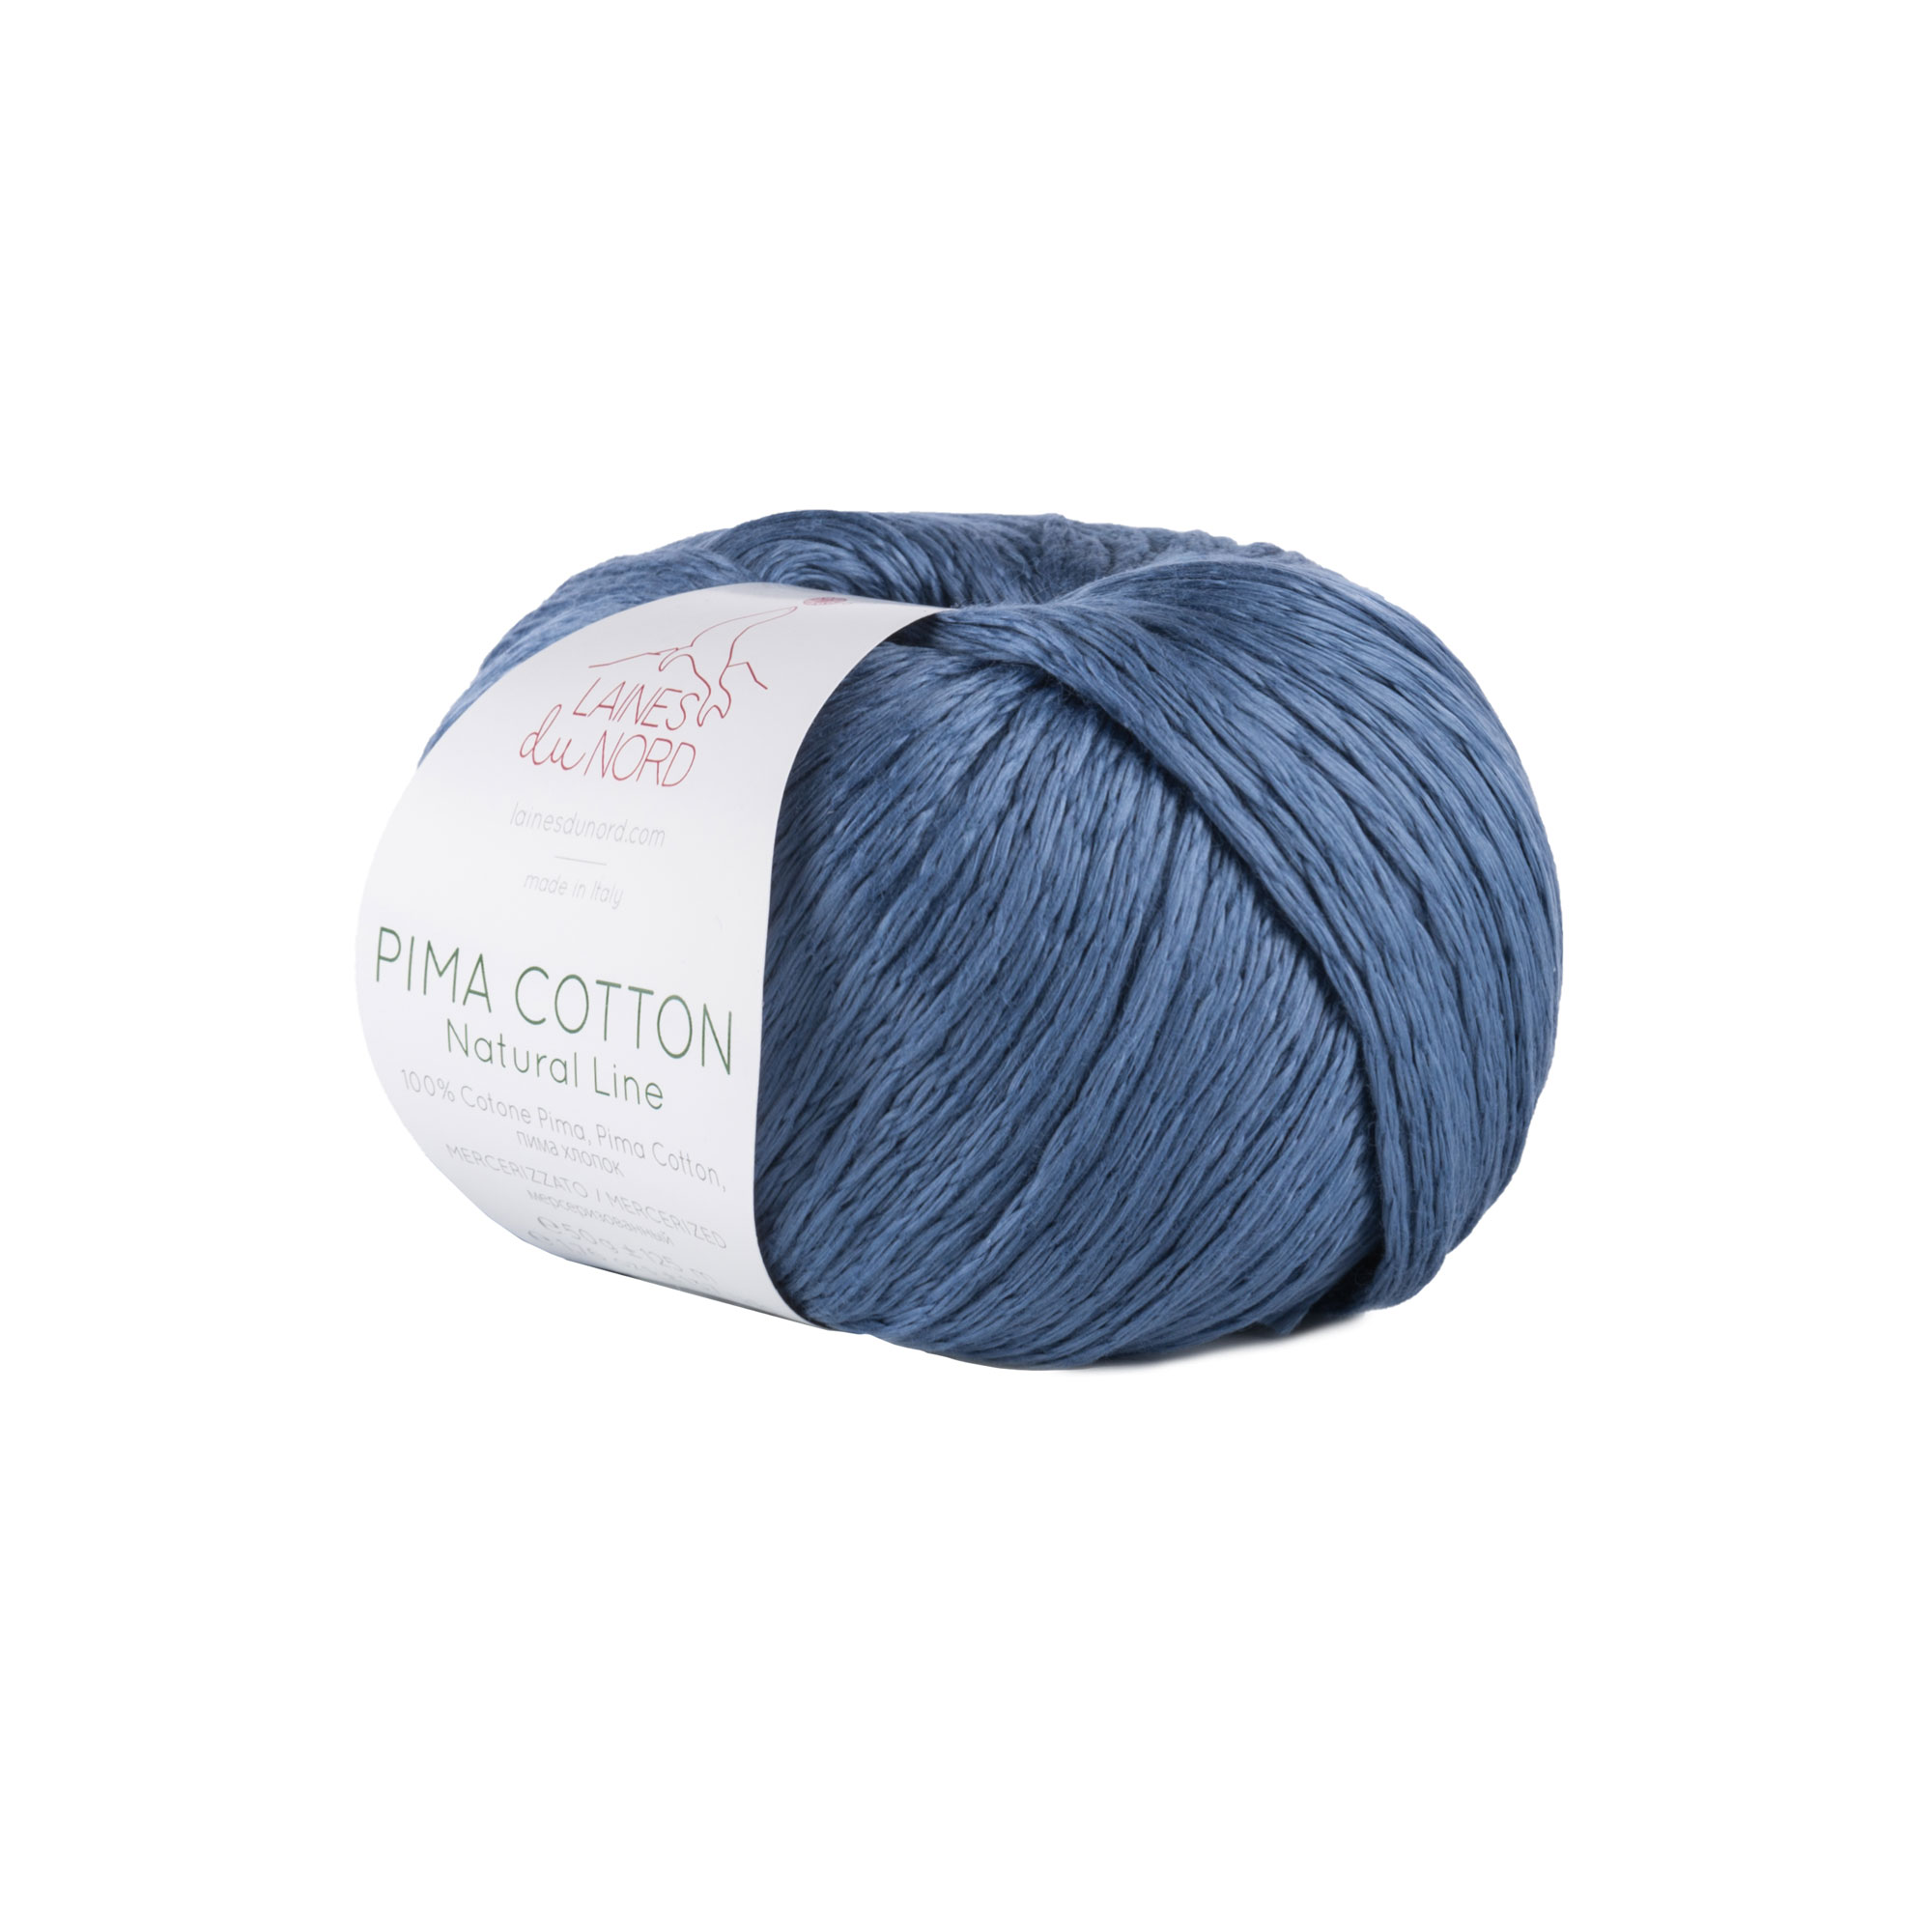 Buy LAINES PIMA COTTON From LAINES NORD Online | Yarnstreet.com